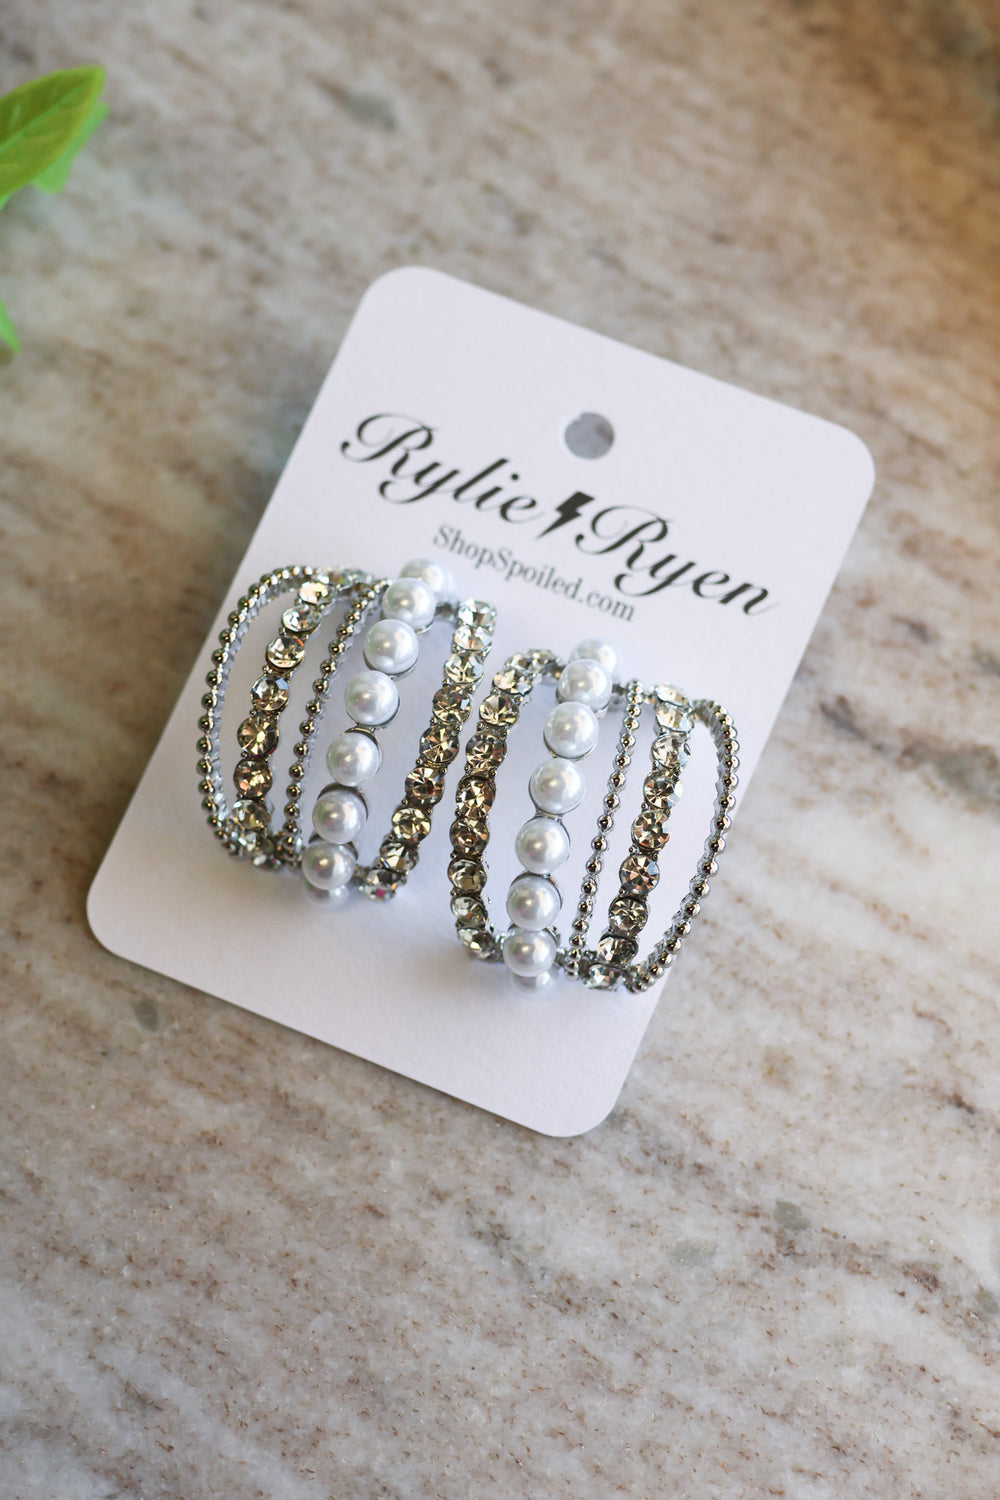 Chic and Sparkling Earrings in Silver - ShopSpoiled